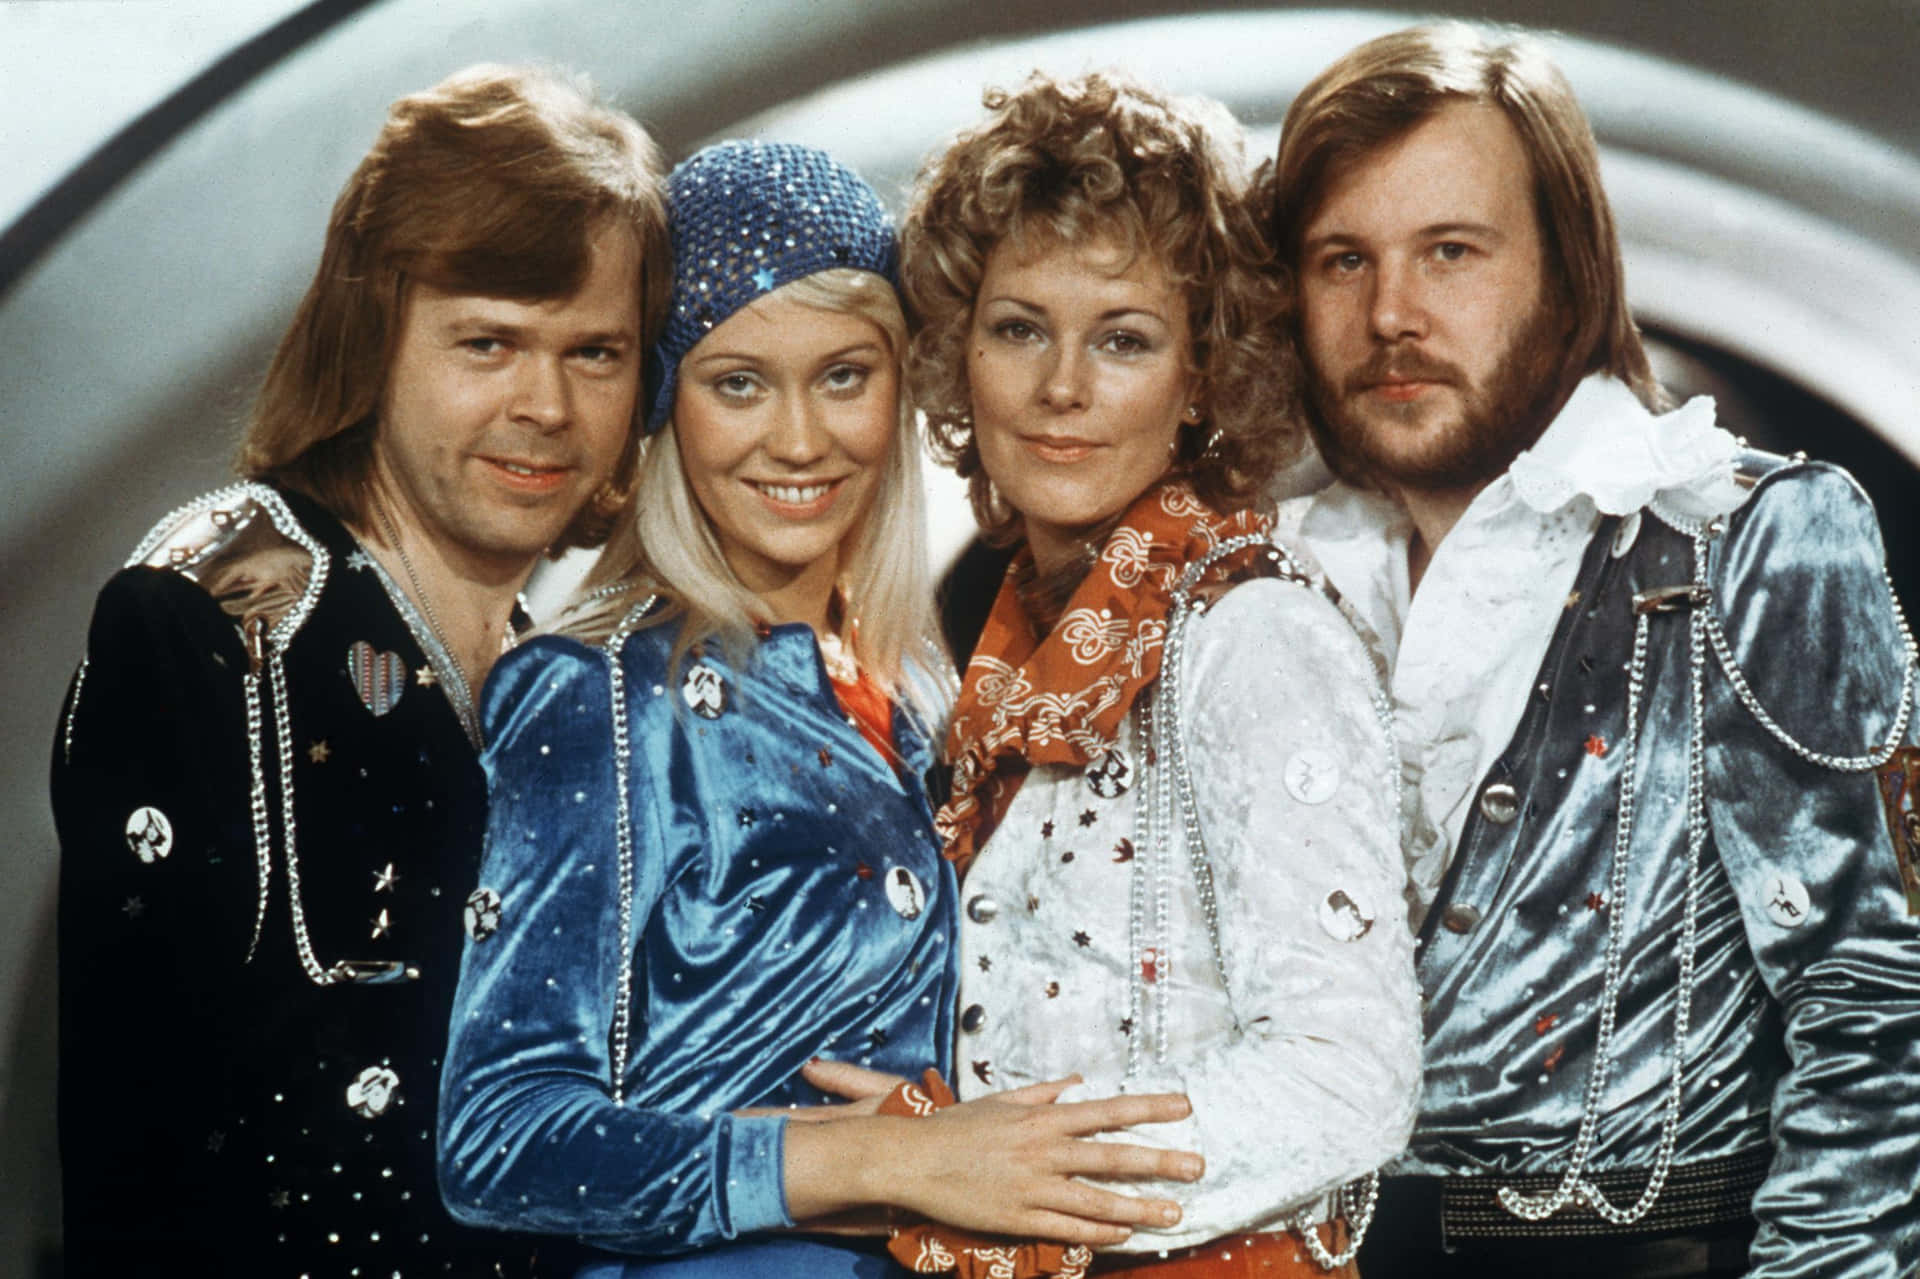 "The Famously Iconic Group ABBA"